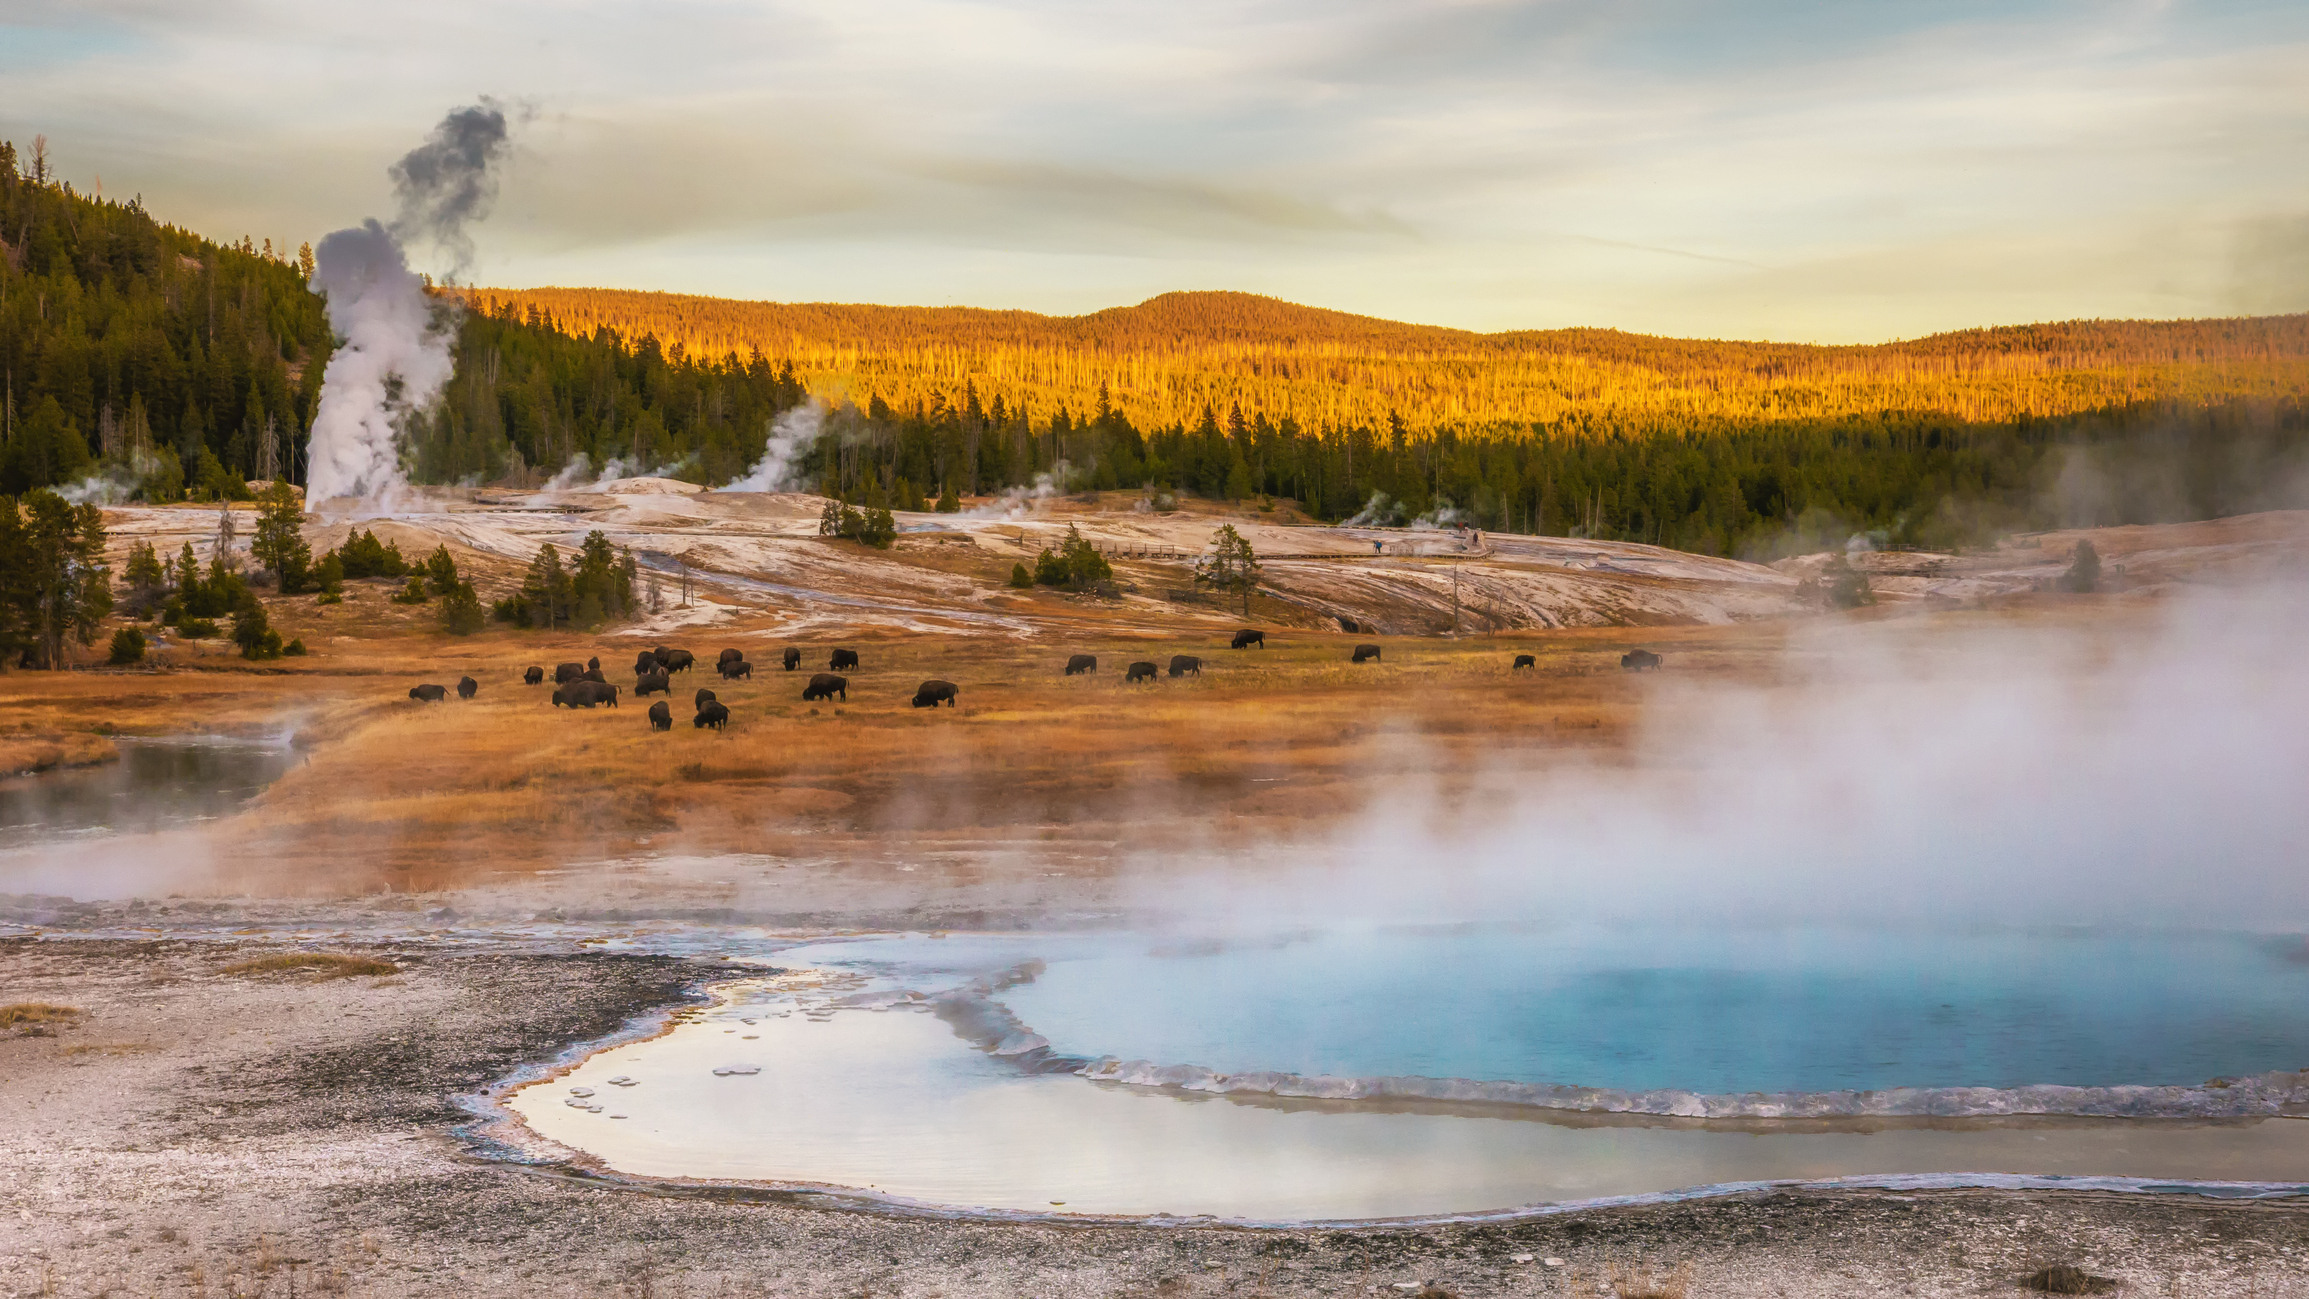 Steam rising near the Firehole River from geothermal pools and geysers yellowstone national park